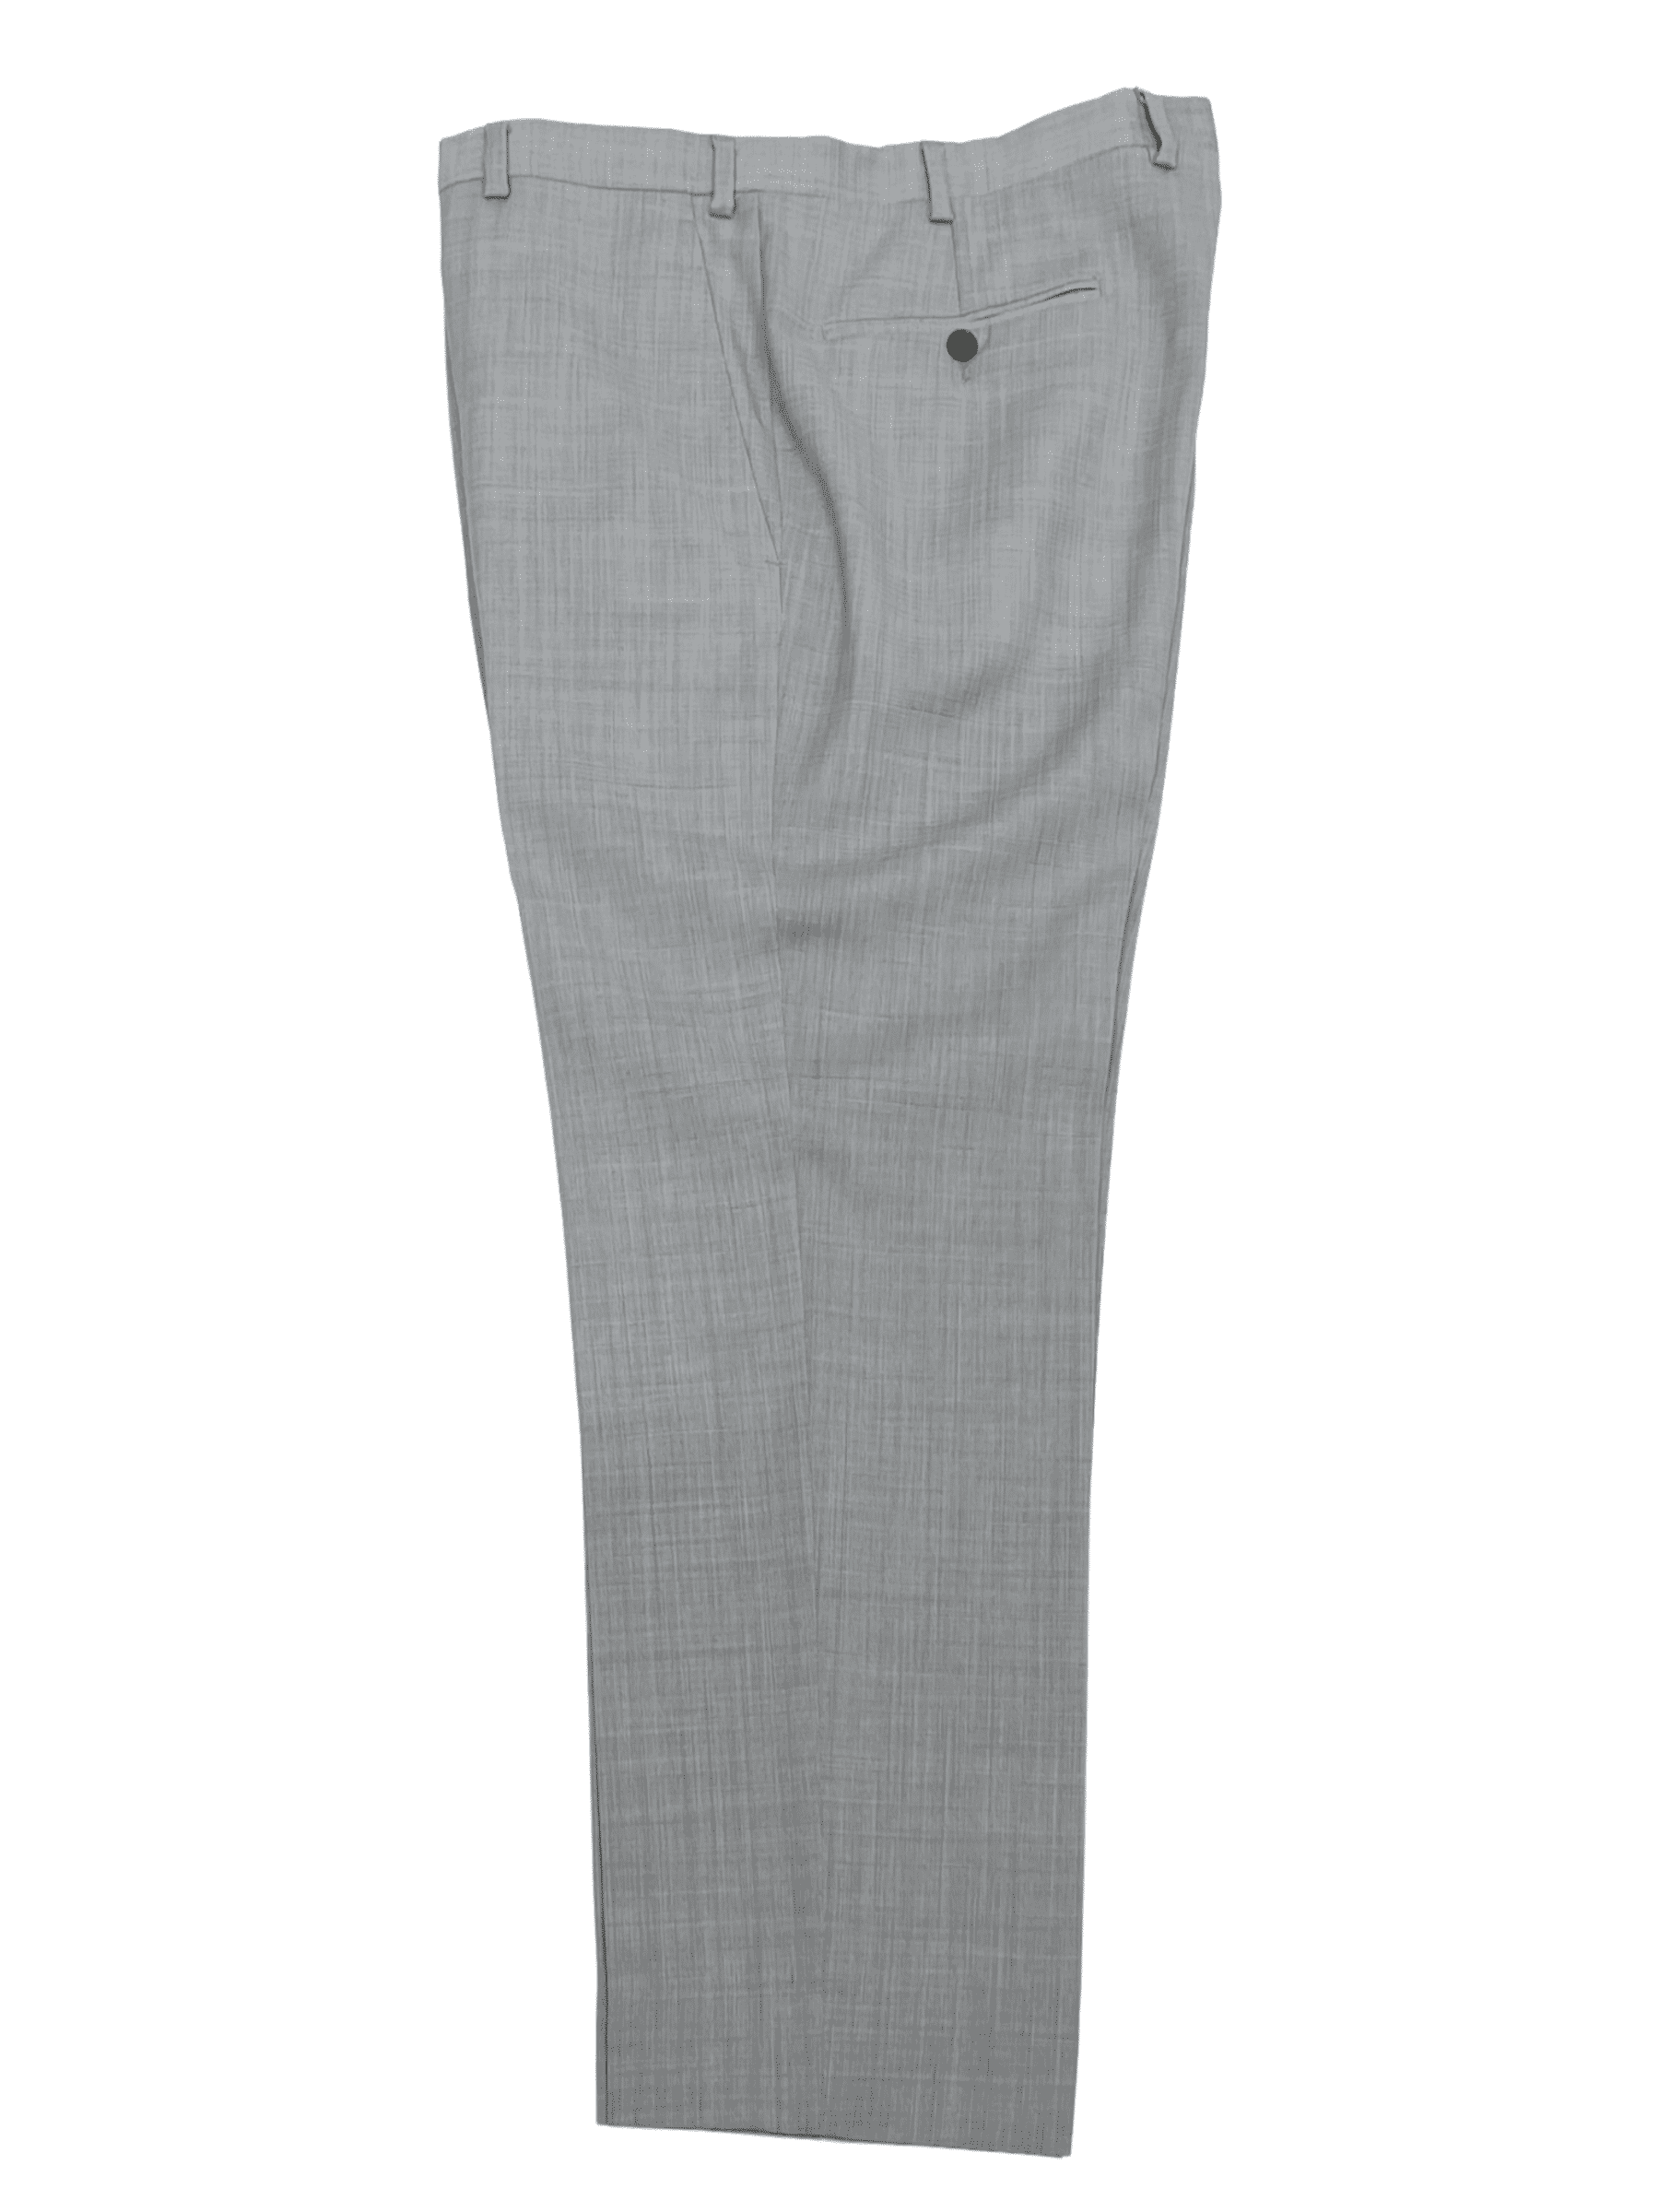 Emporio Armani Grey Wool Dress Pant 34W 27L - Genuine Design Luxury Consignment Calgary, Alberta, Canada New and Pre-Owned Clothing, Shoes, Accessories.